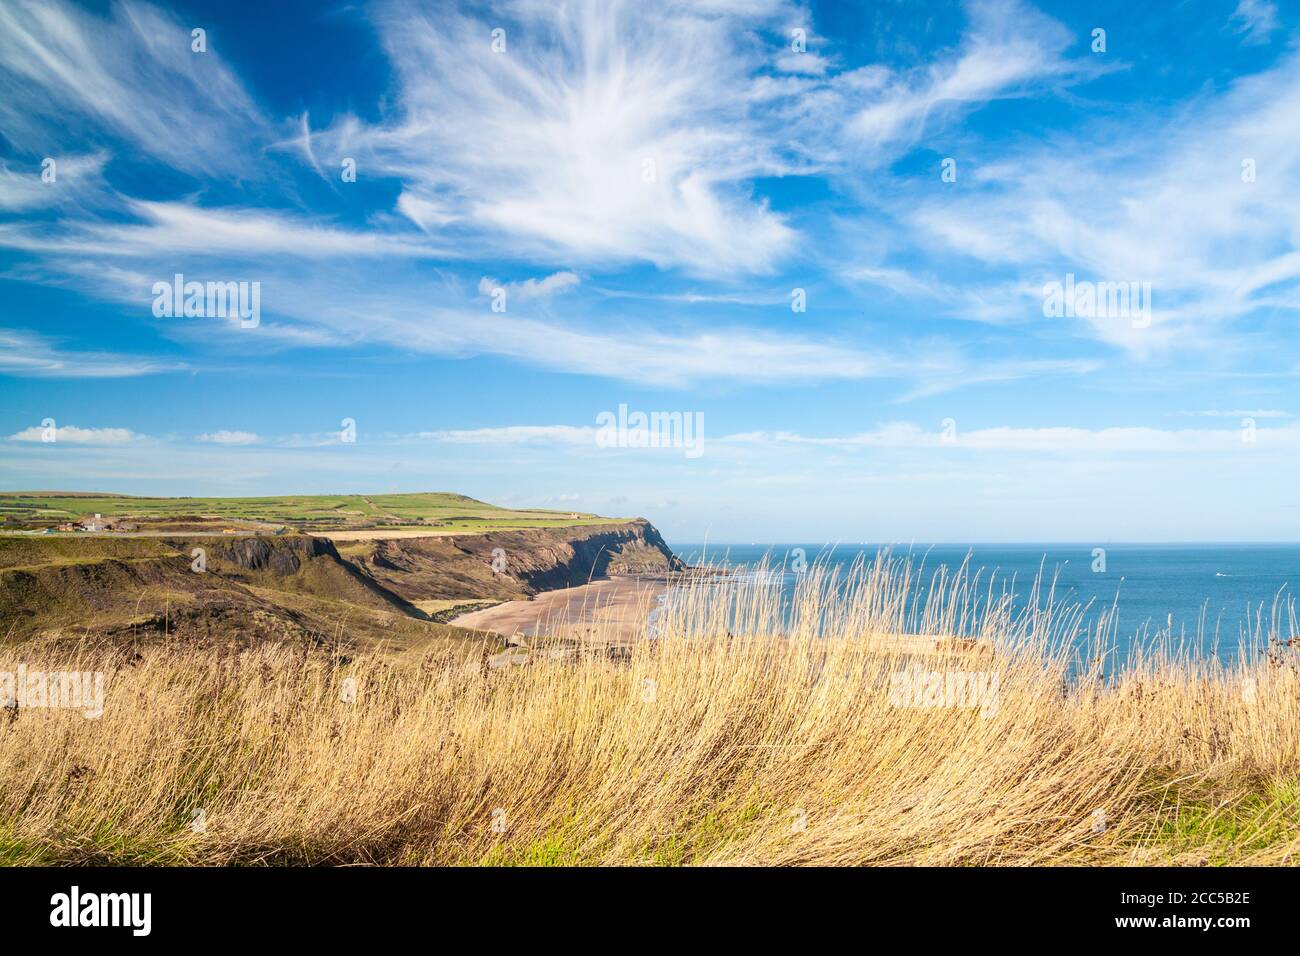 View over Cattersty Sands beach at Skinningrove between Staithes and Saltburn from The Cleveland Way coastal footpath, North Yorkshire, England, UK Stock Photo